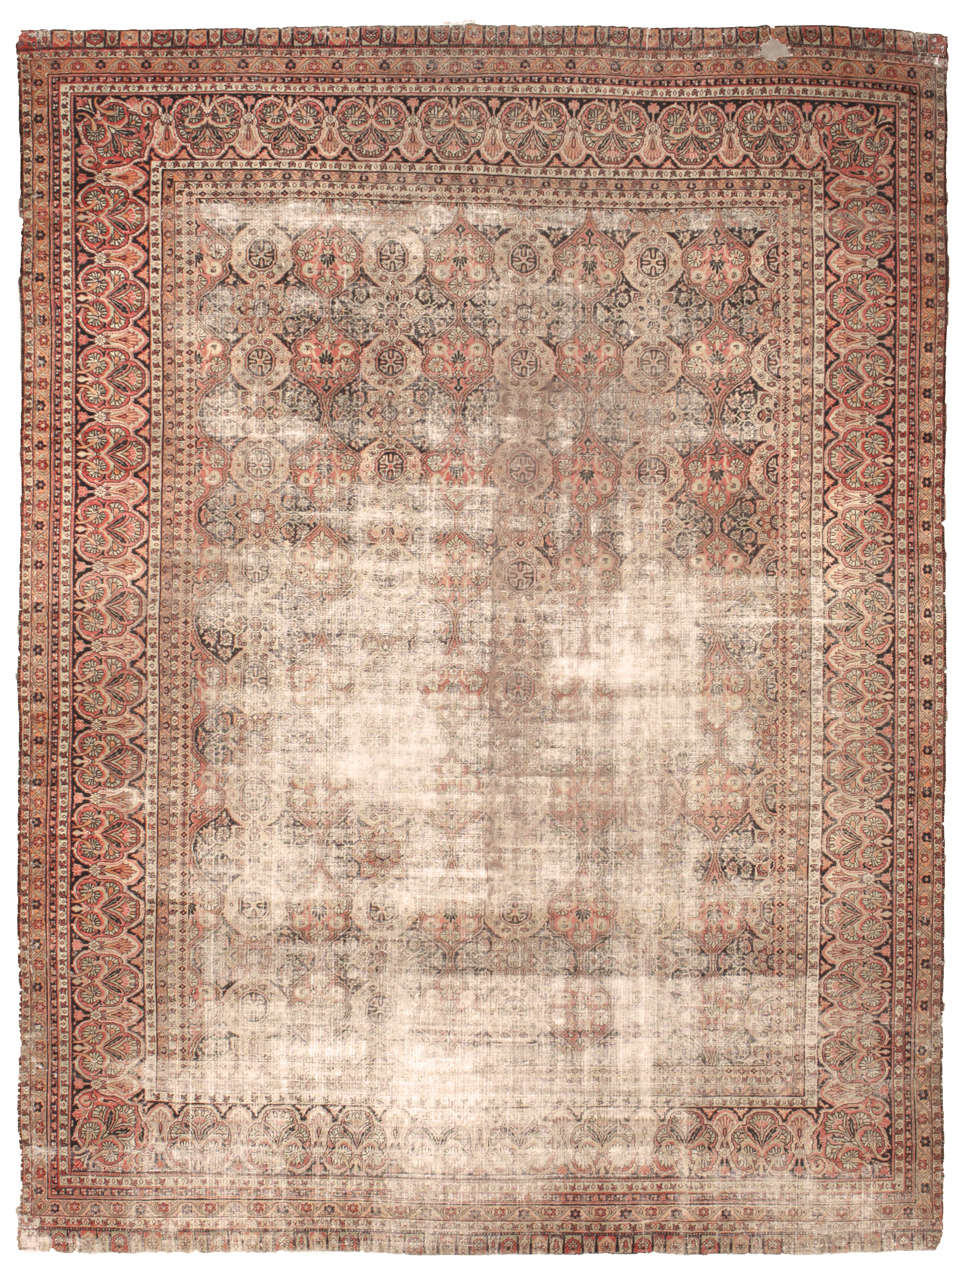  A rich, bold palette would seem appropriate for this very large Amritsa Antique Indian Rug of regal color and appearance. Brown, rust orange and parchment predominate. A border of large segmented rosettes and smaller spreading palm fronds encloses